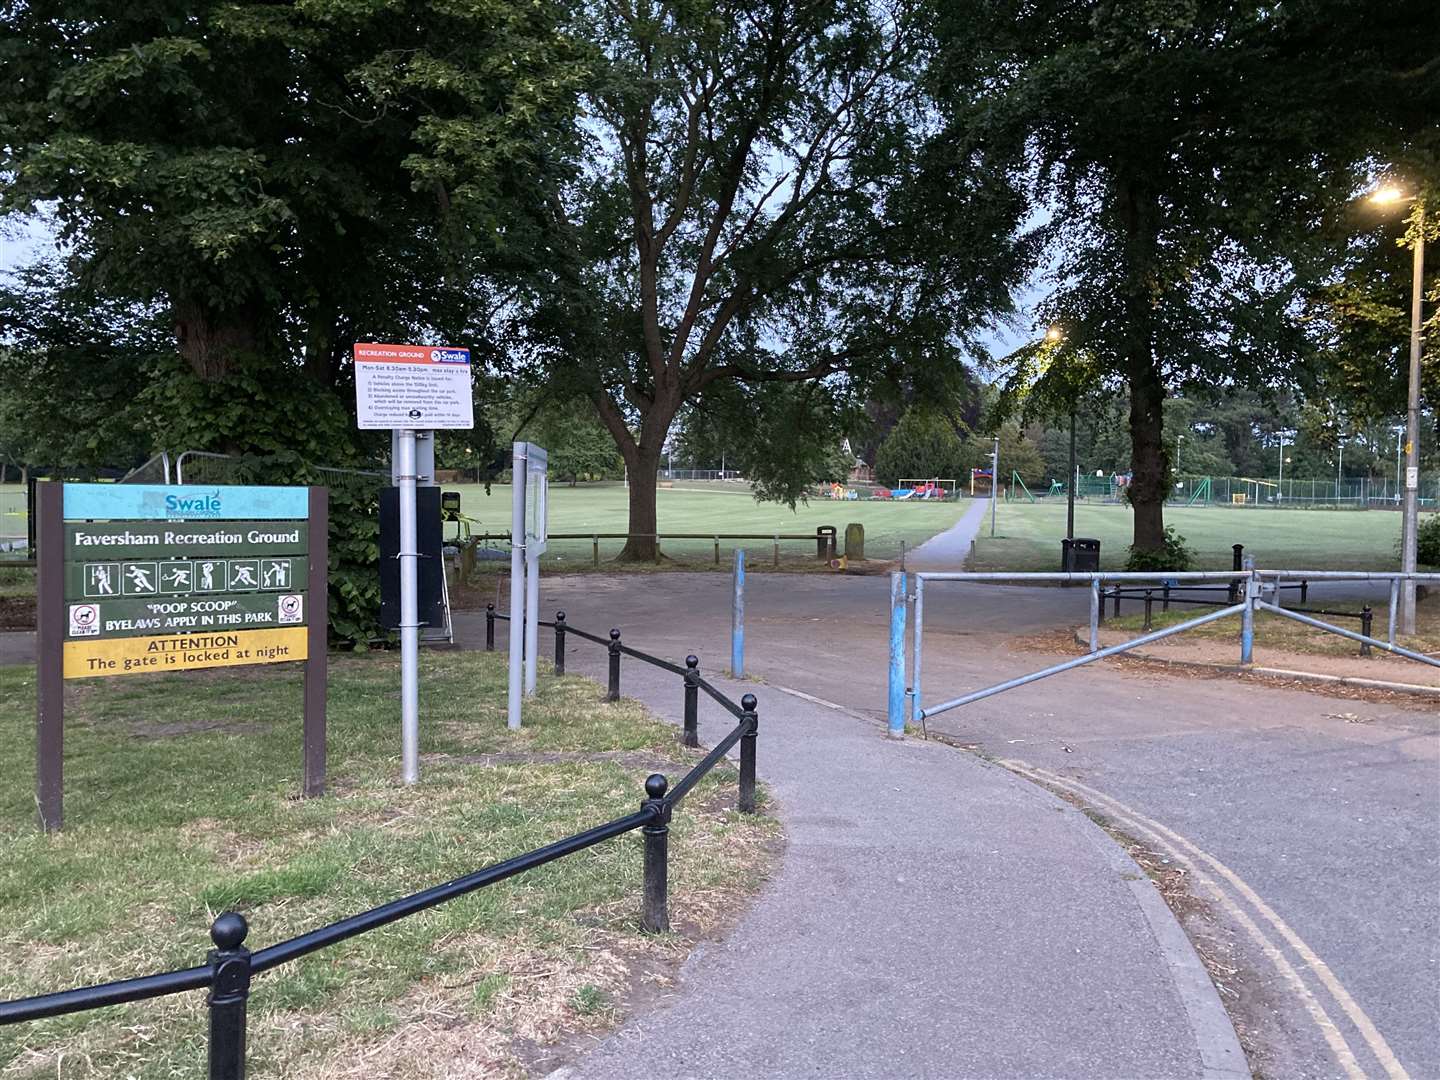 The attempted theft happened near Faversham Recreation Ground